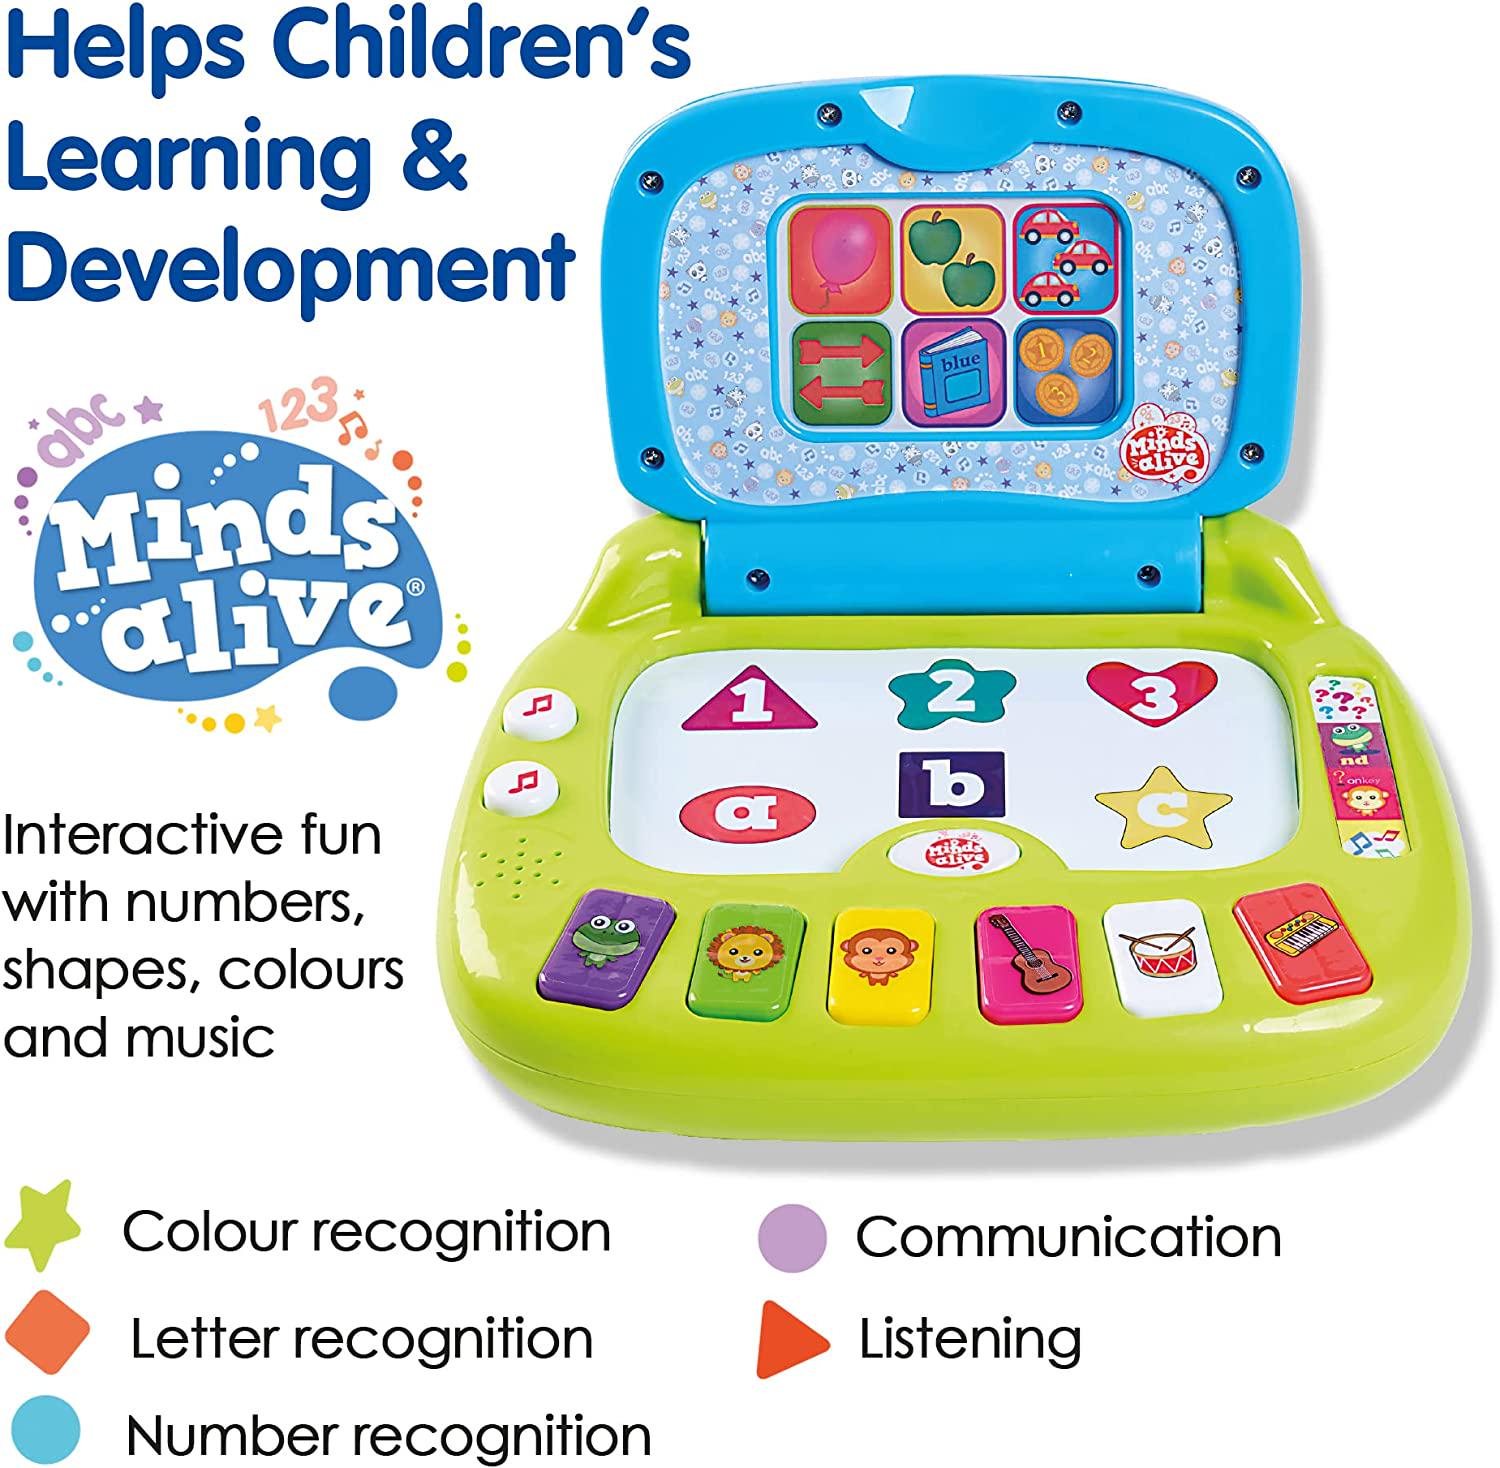 Minds Alive, Minds Alive MA03 Smart Tablet Toy for Kids-Helps Child Development, Listening and Attention Skills-Features Fun Interactive Learning Activities, 2+ Years